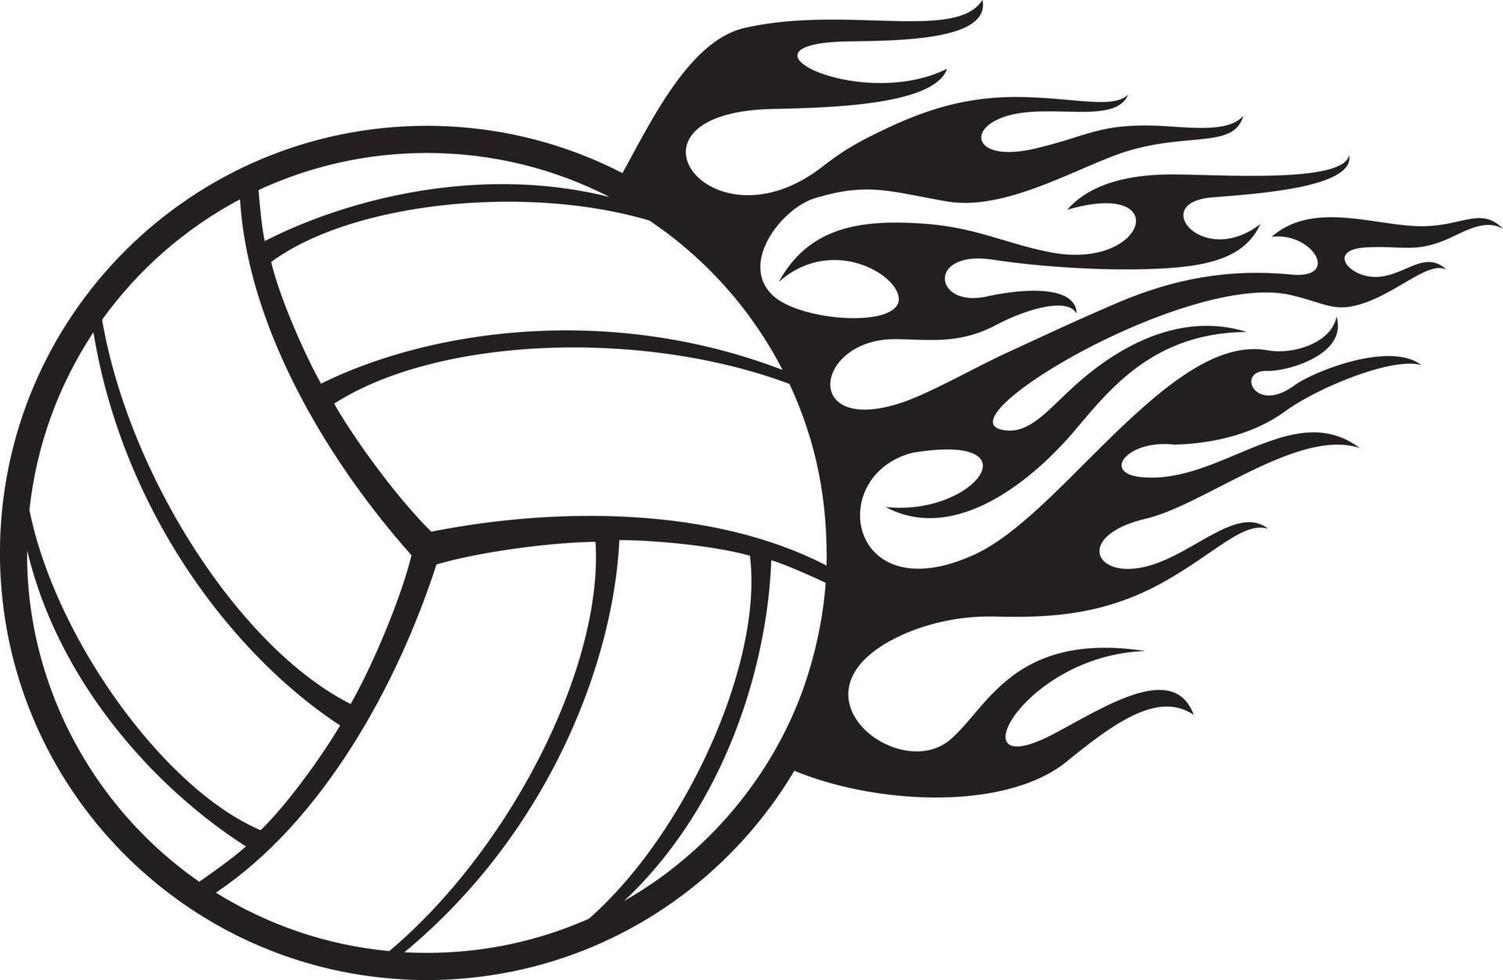 Flaming volleyball ball black and white. Vector illustration.